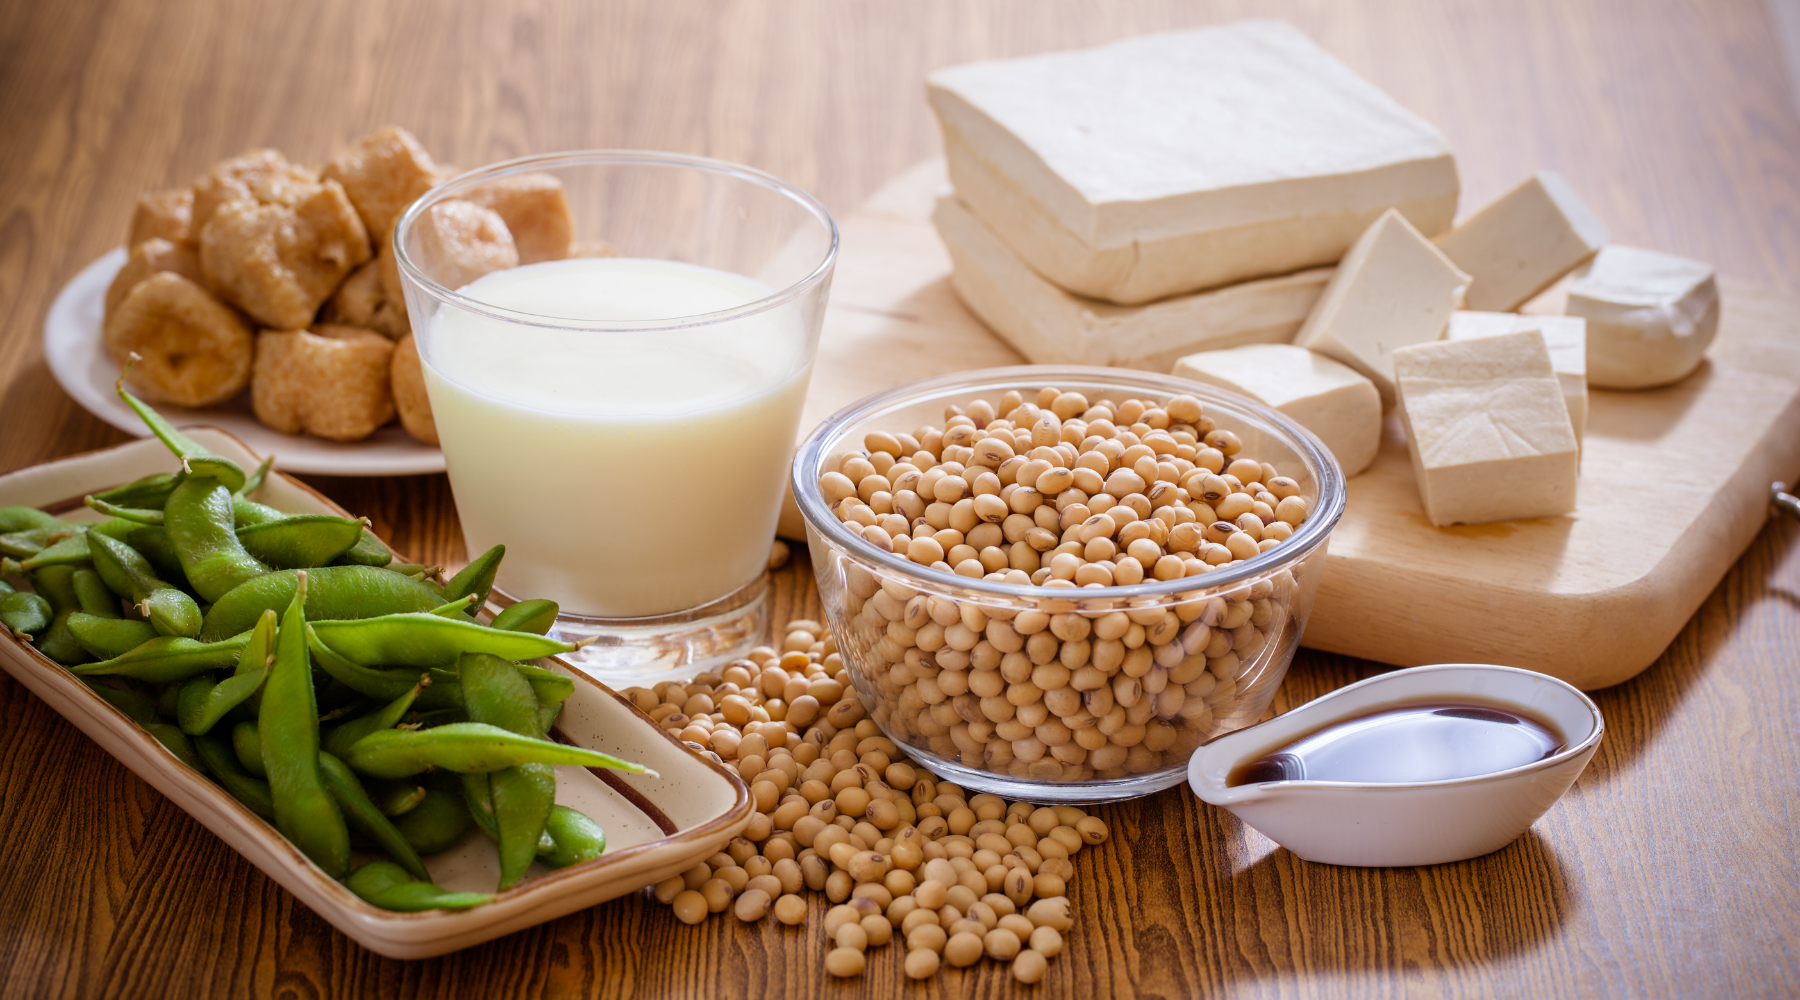 THE BENEFITS OF SOY (INCLUDING TOFU)